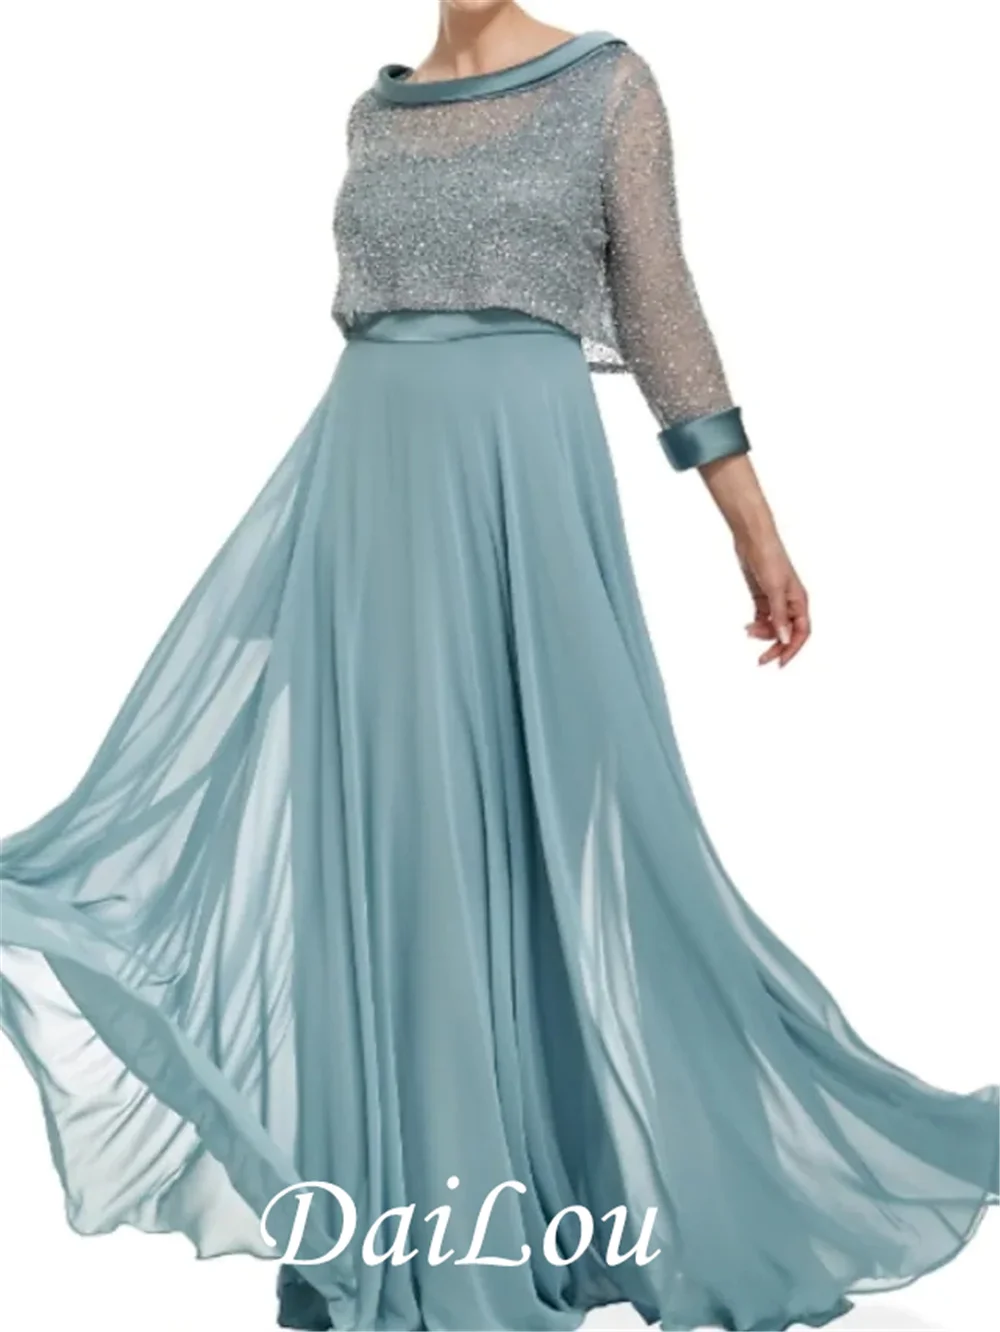 

A-Line Mother of the Bride Dress Wrap Included Scoop Neck Floor Length Chiffon 3/4 Length Sleeve with Lace Crystals Ruching 2021